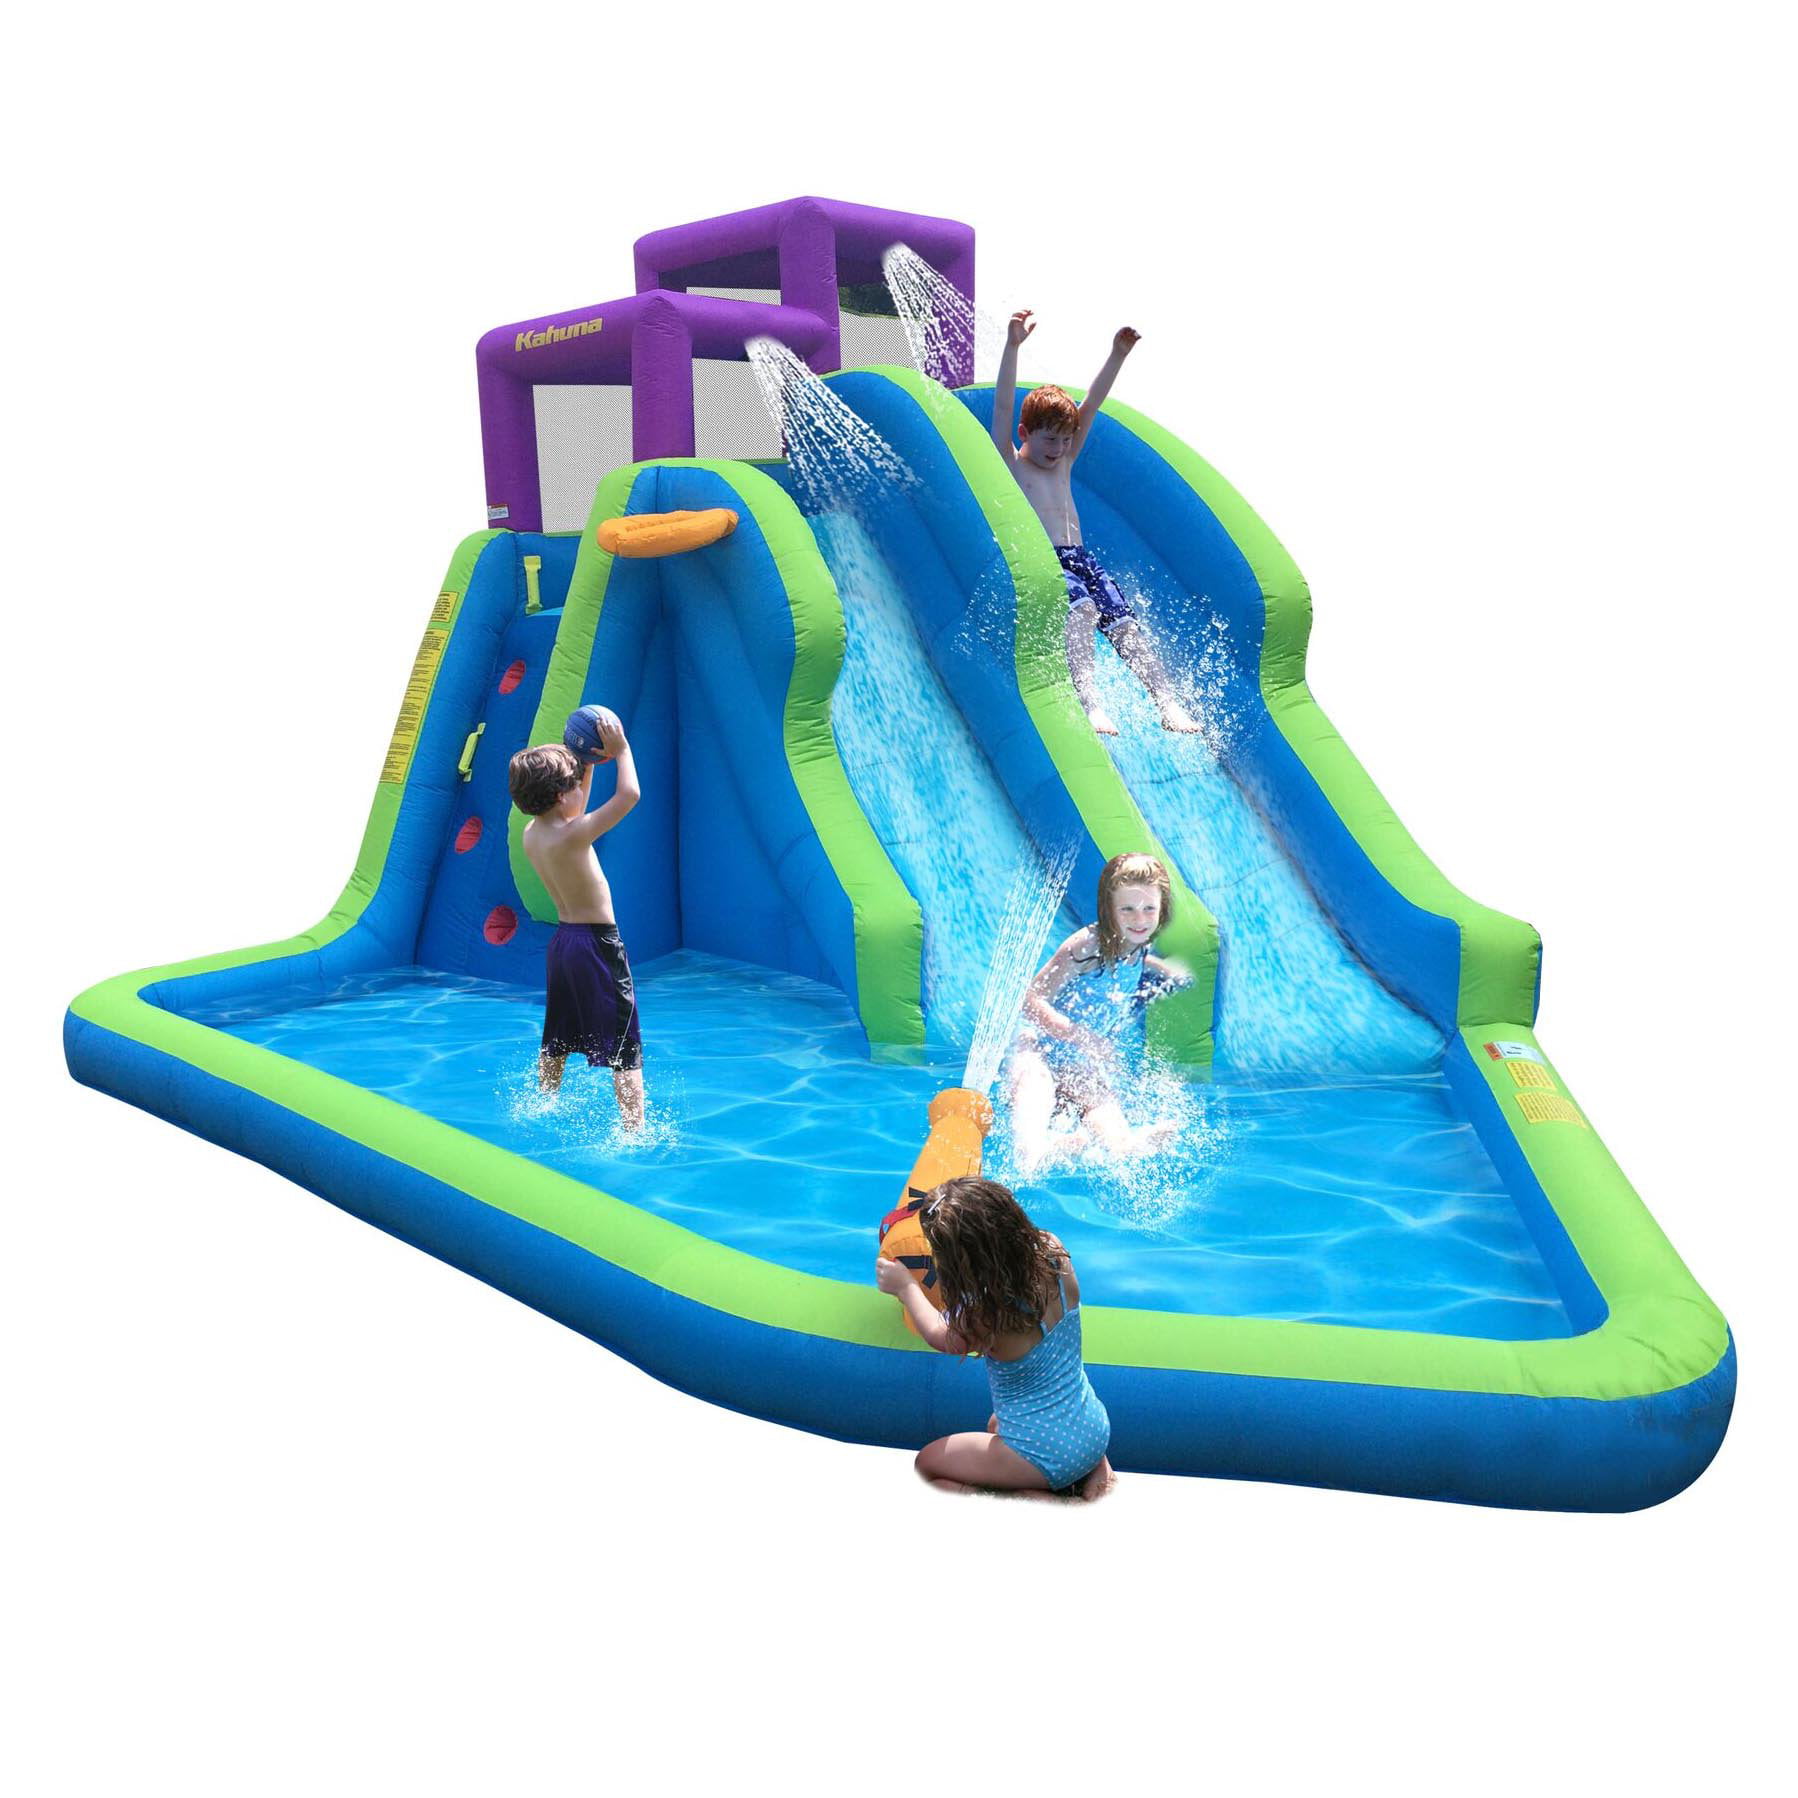 Natuworld 15FT Lawn Water Slides,Outdoor Water Slide for Kids Inflatable Crash Pad for Garden Backyard,Summer Party Water Toys 